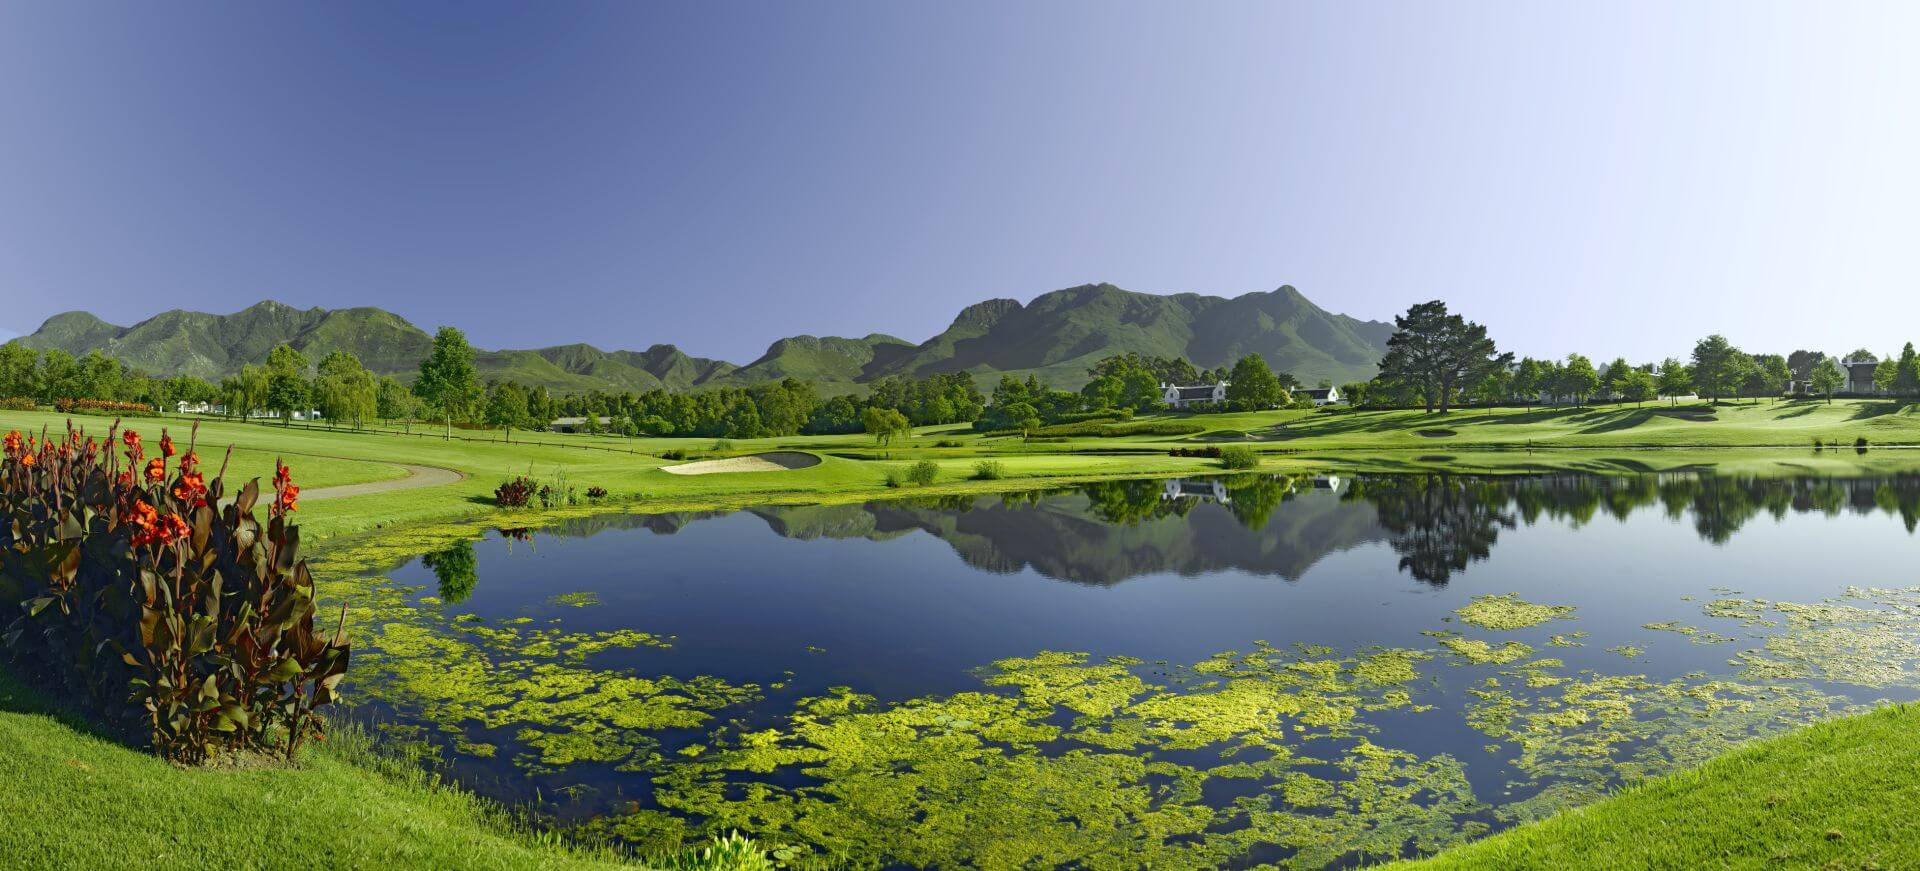 Fancourt south africa 13